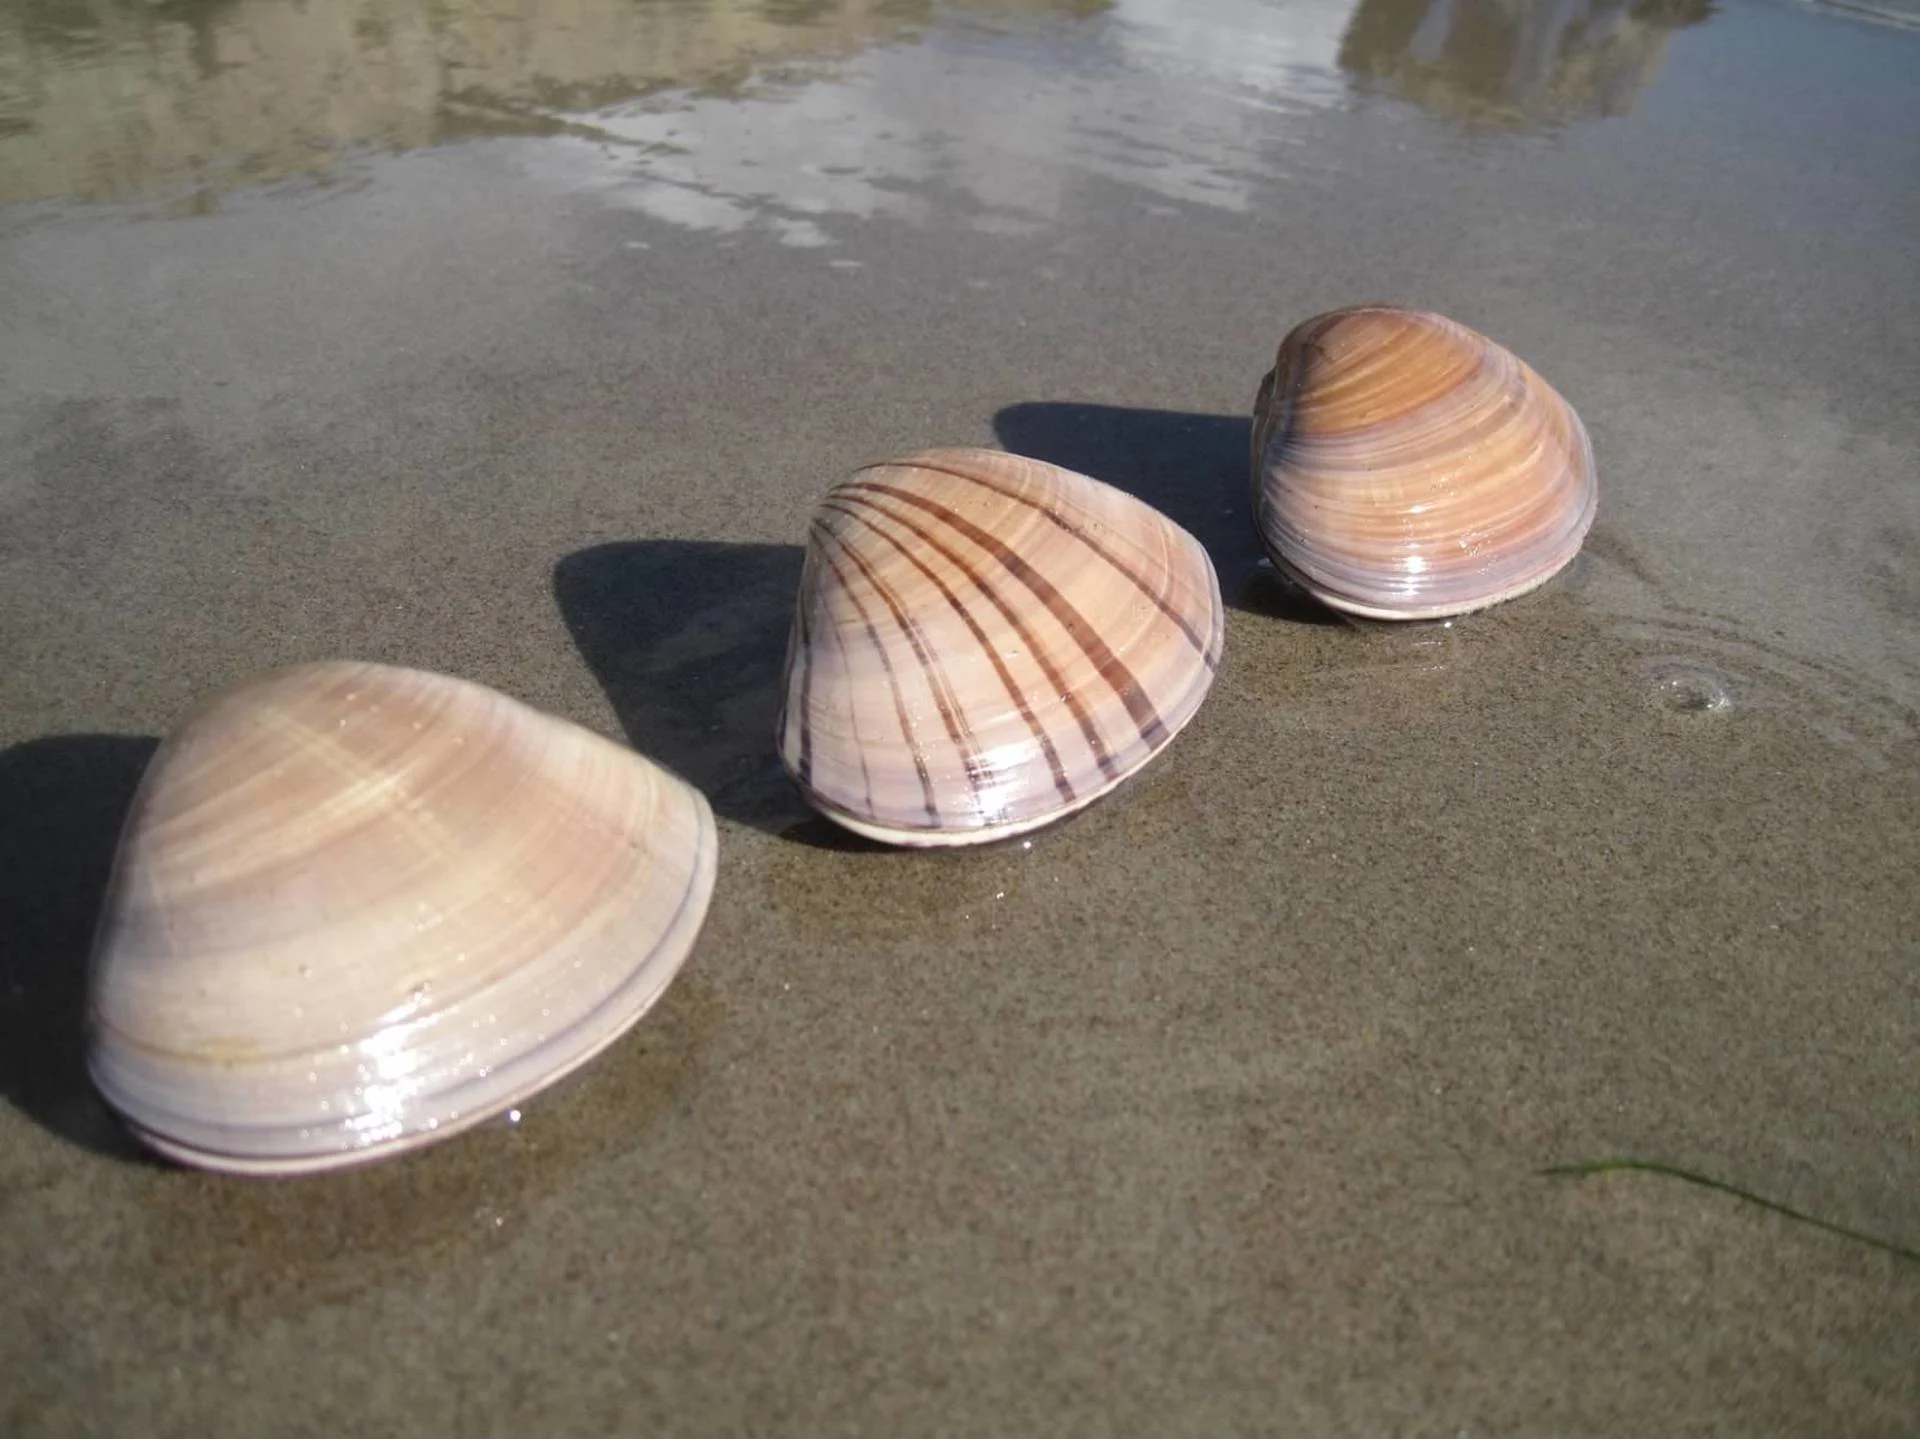 A trip to the beach ended with a hefty $88,000 fine for a family after the kids took what they thought were seashells